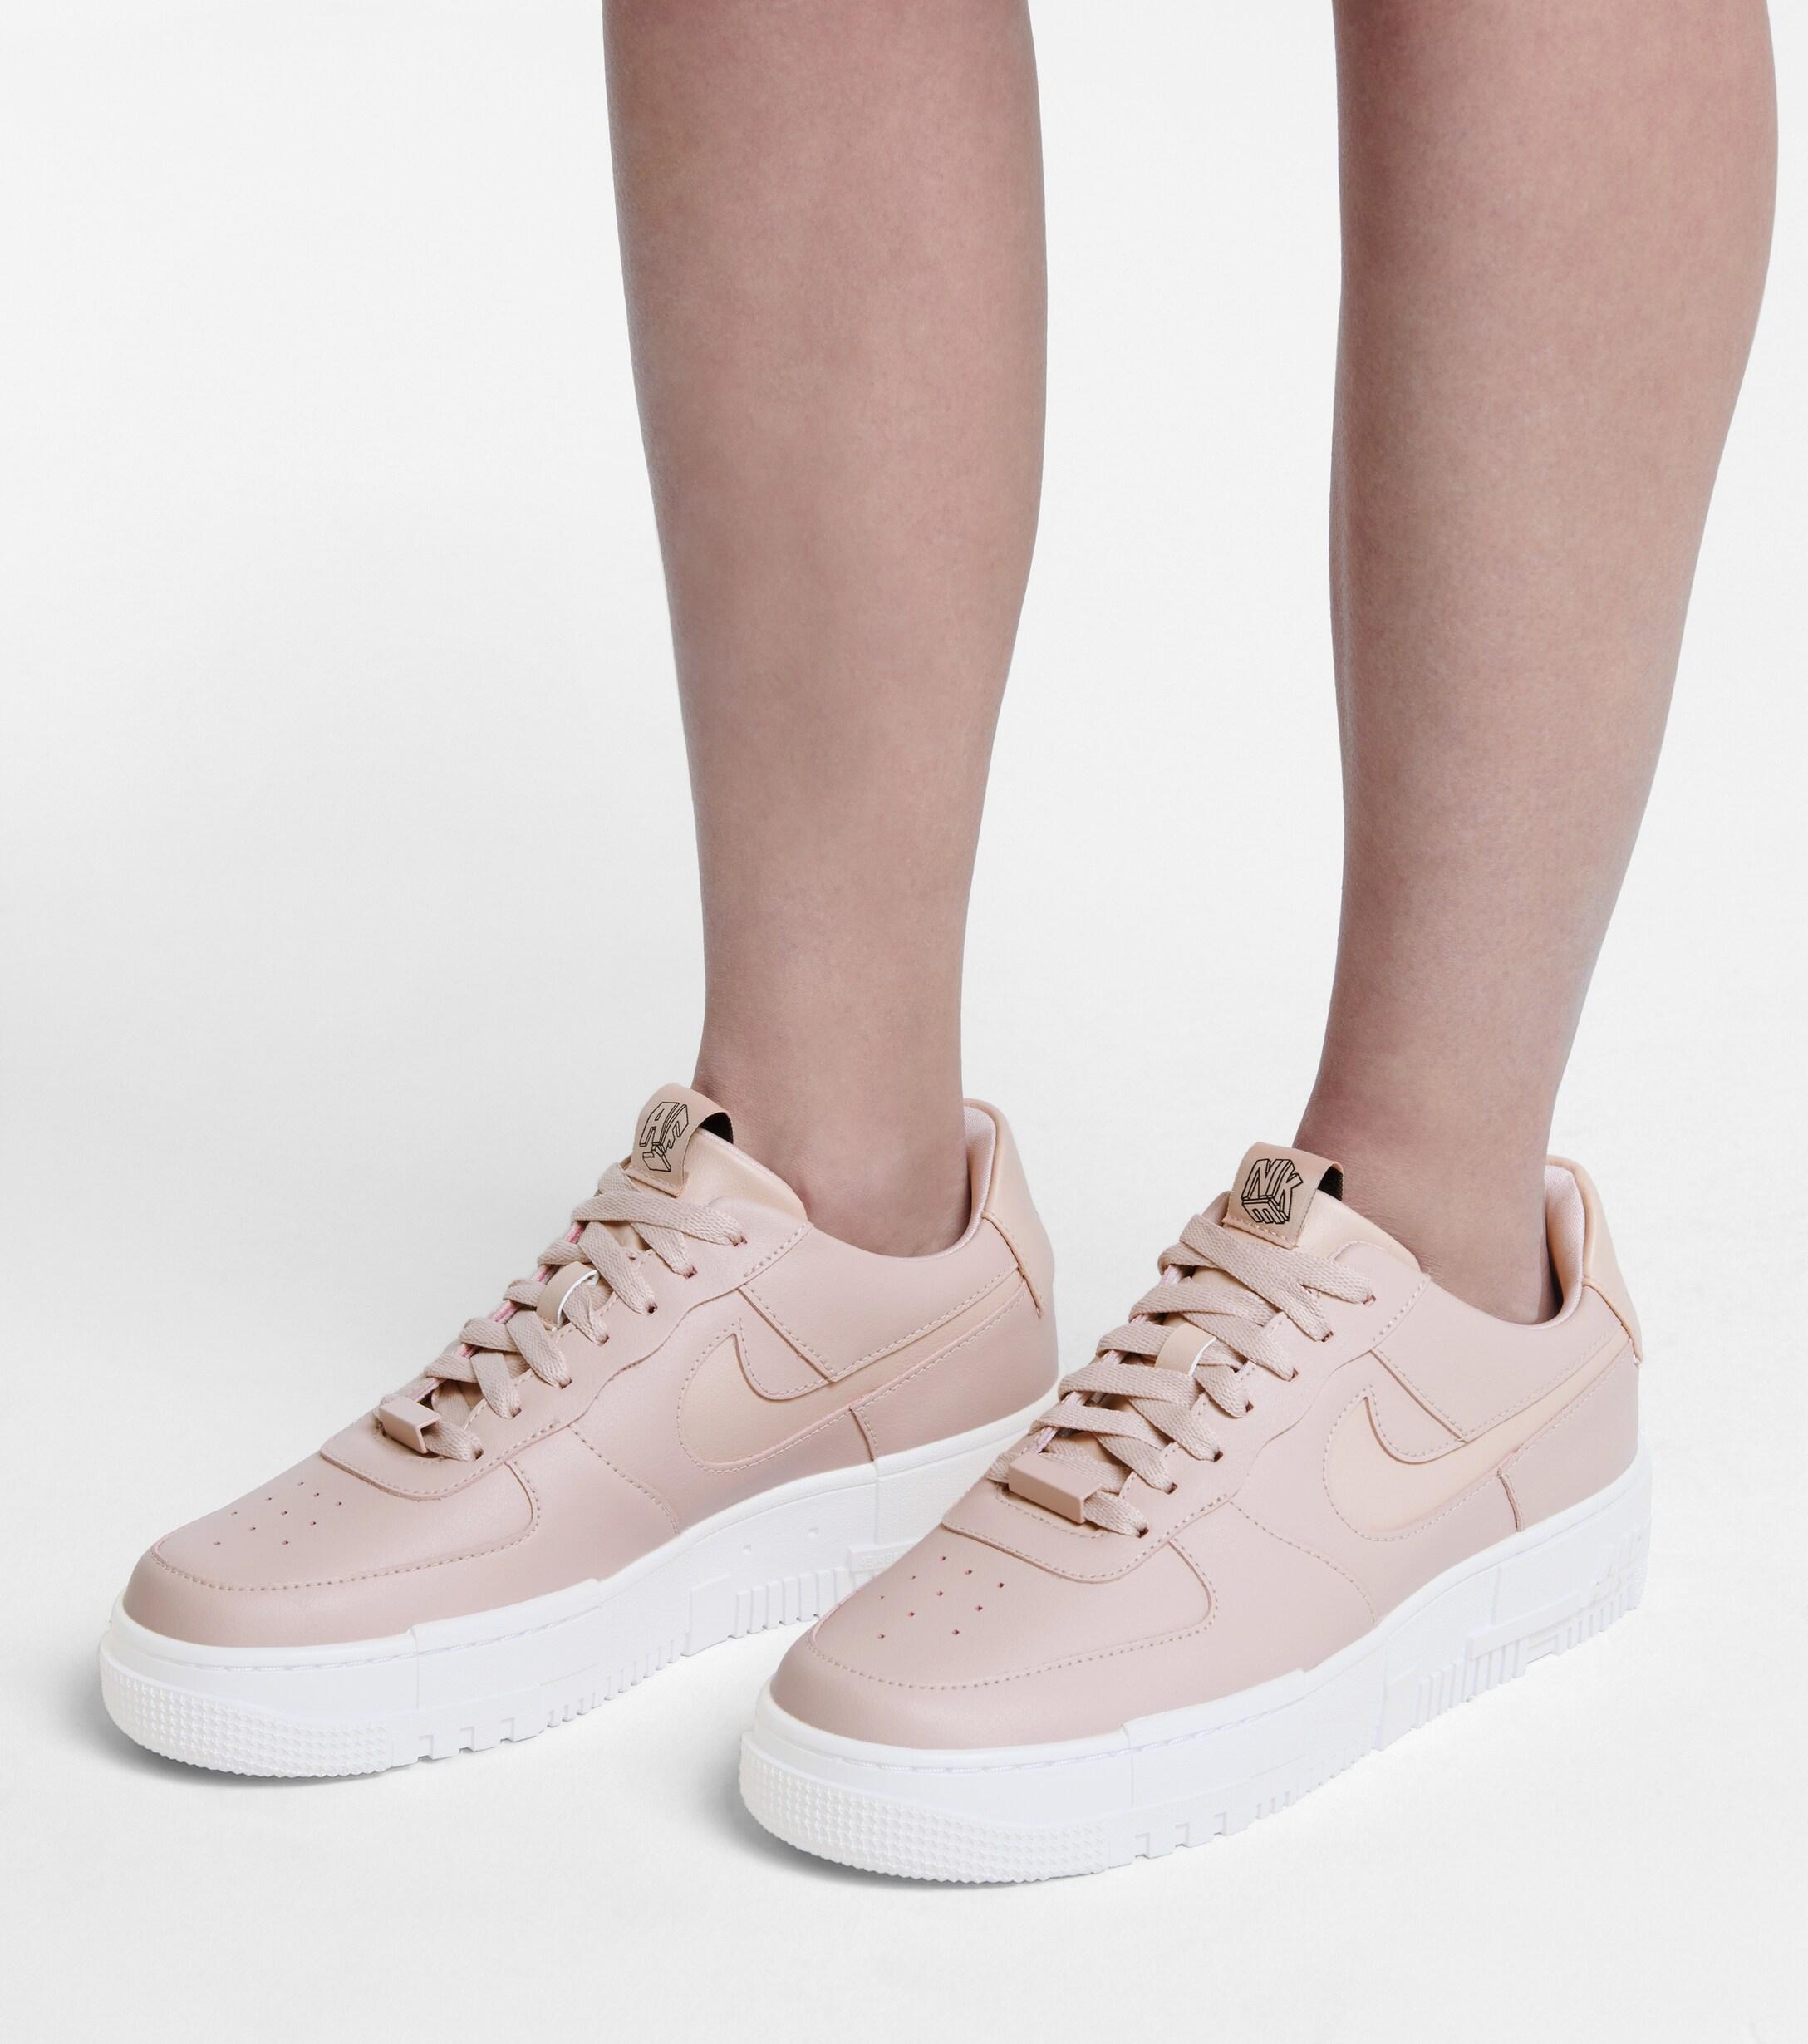 Nike Air Force 1 Pixel Leather Sneakers in Pink | Lyst